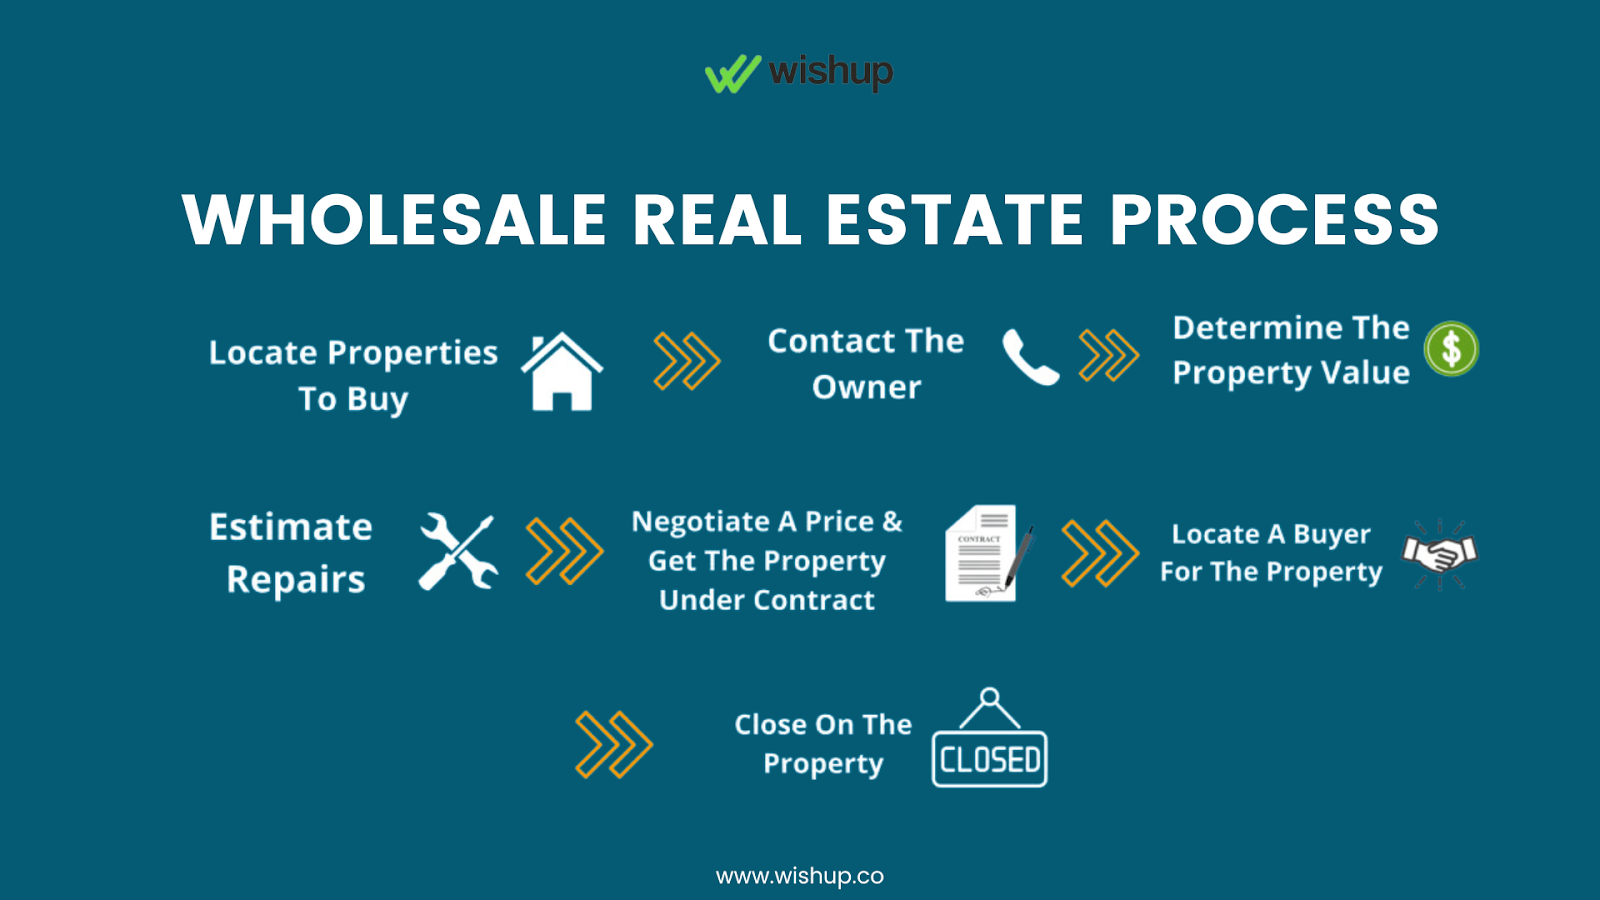 infographic showing real estate wholesaling process